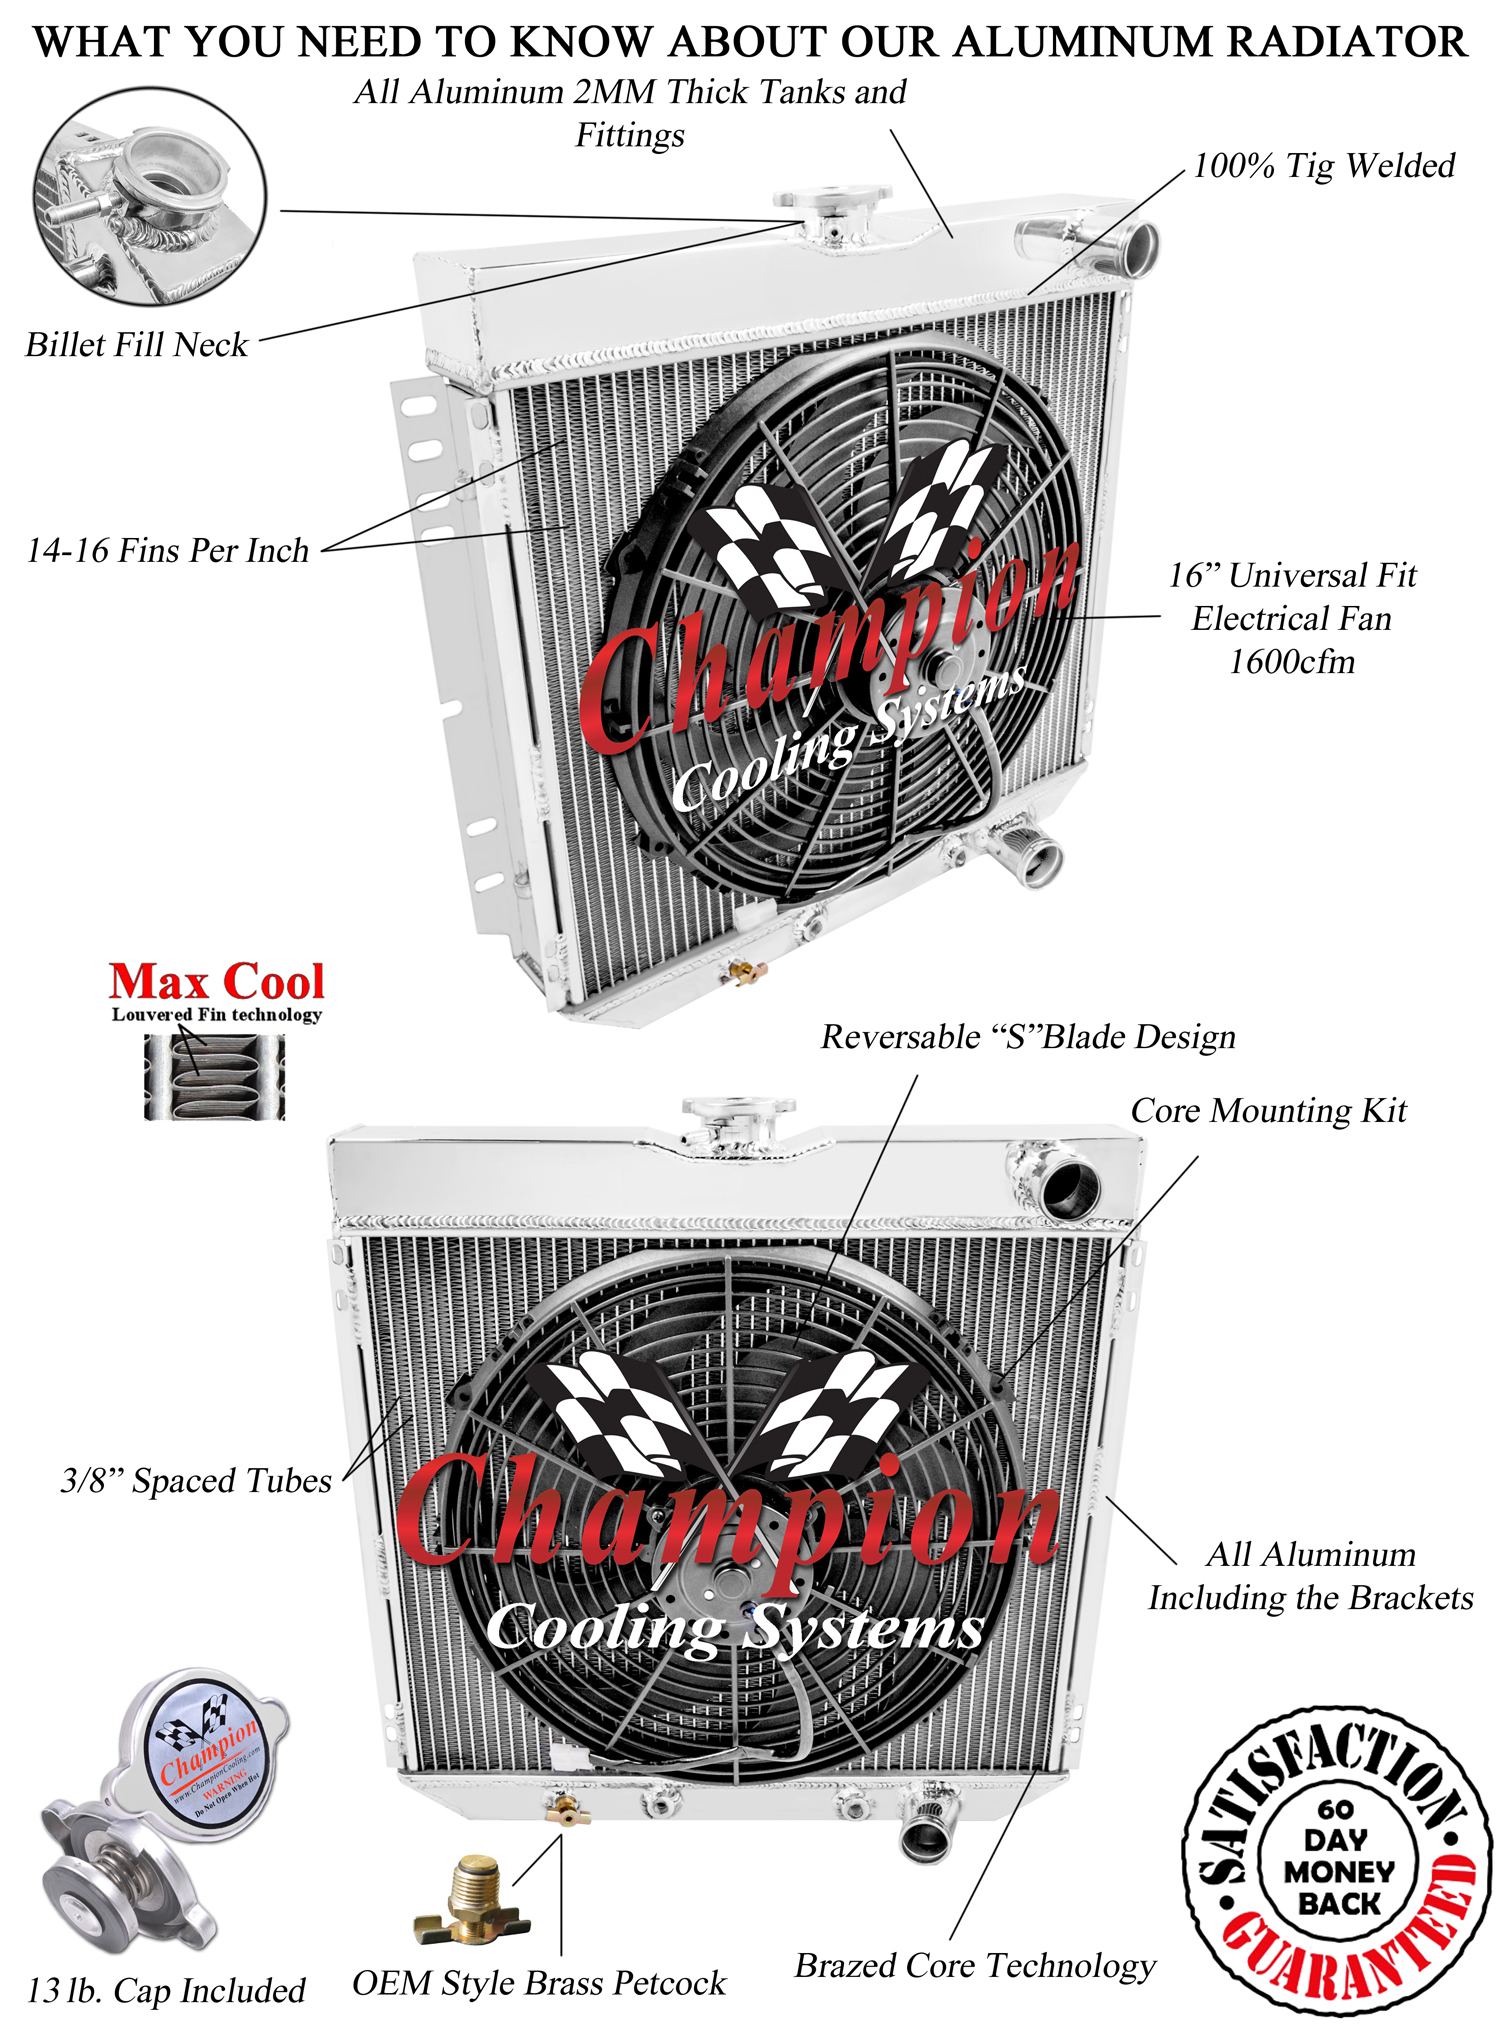 https://www.championcooling.com/photos/Photos%20White/With%20Fans/Combos/340/340white.jpg